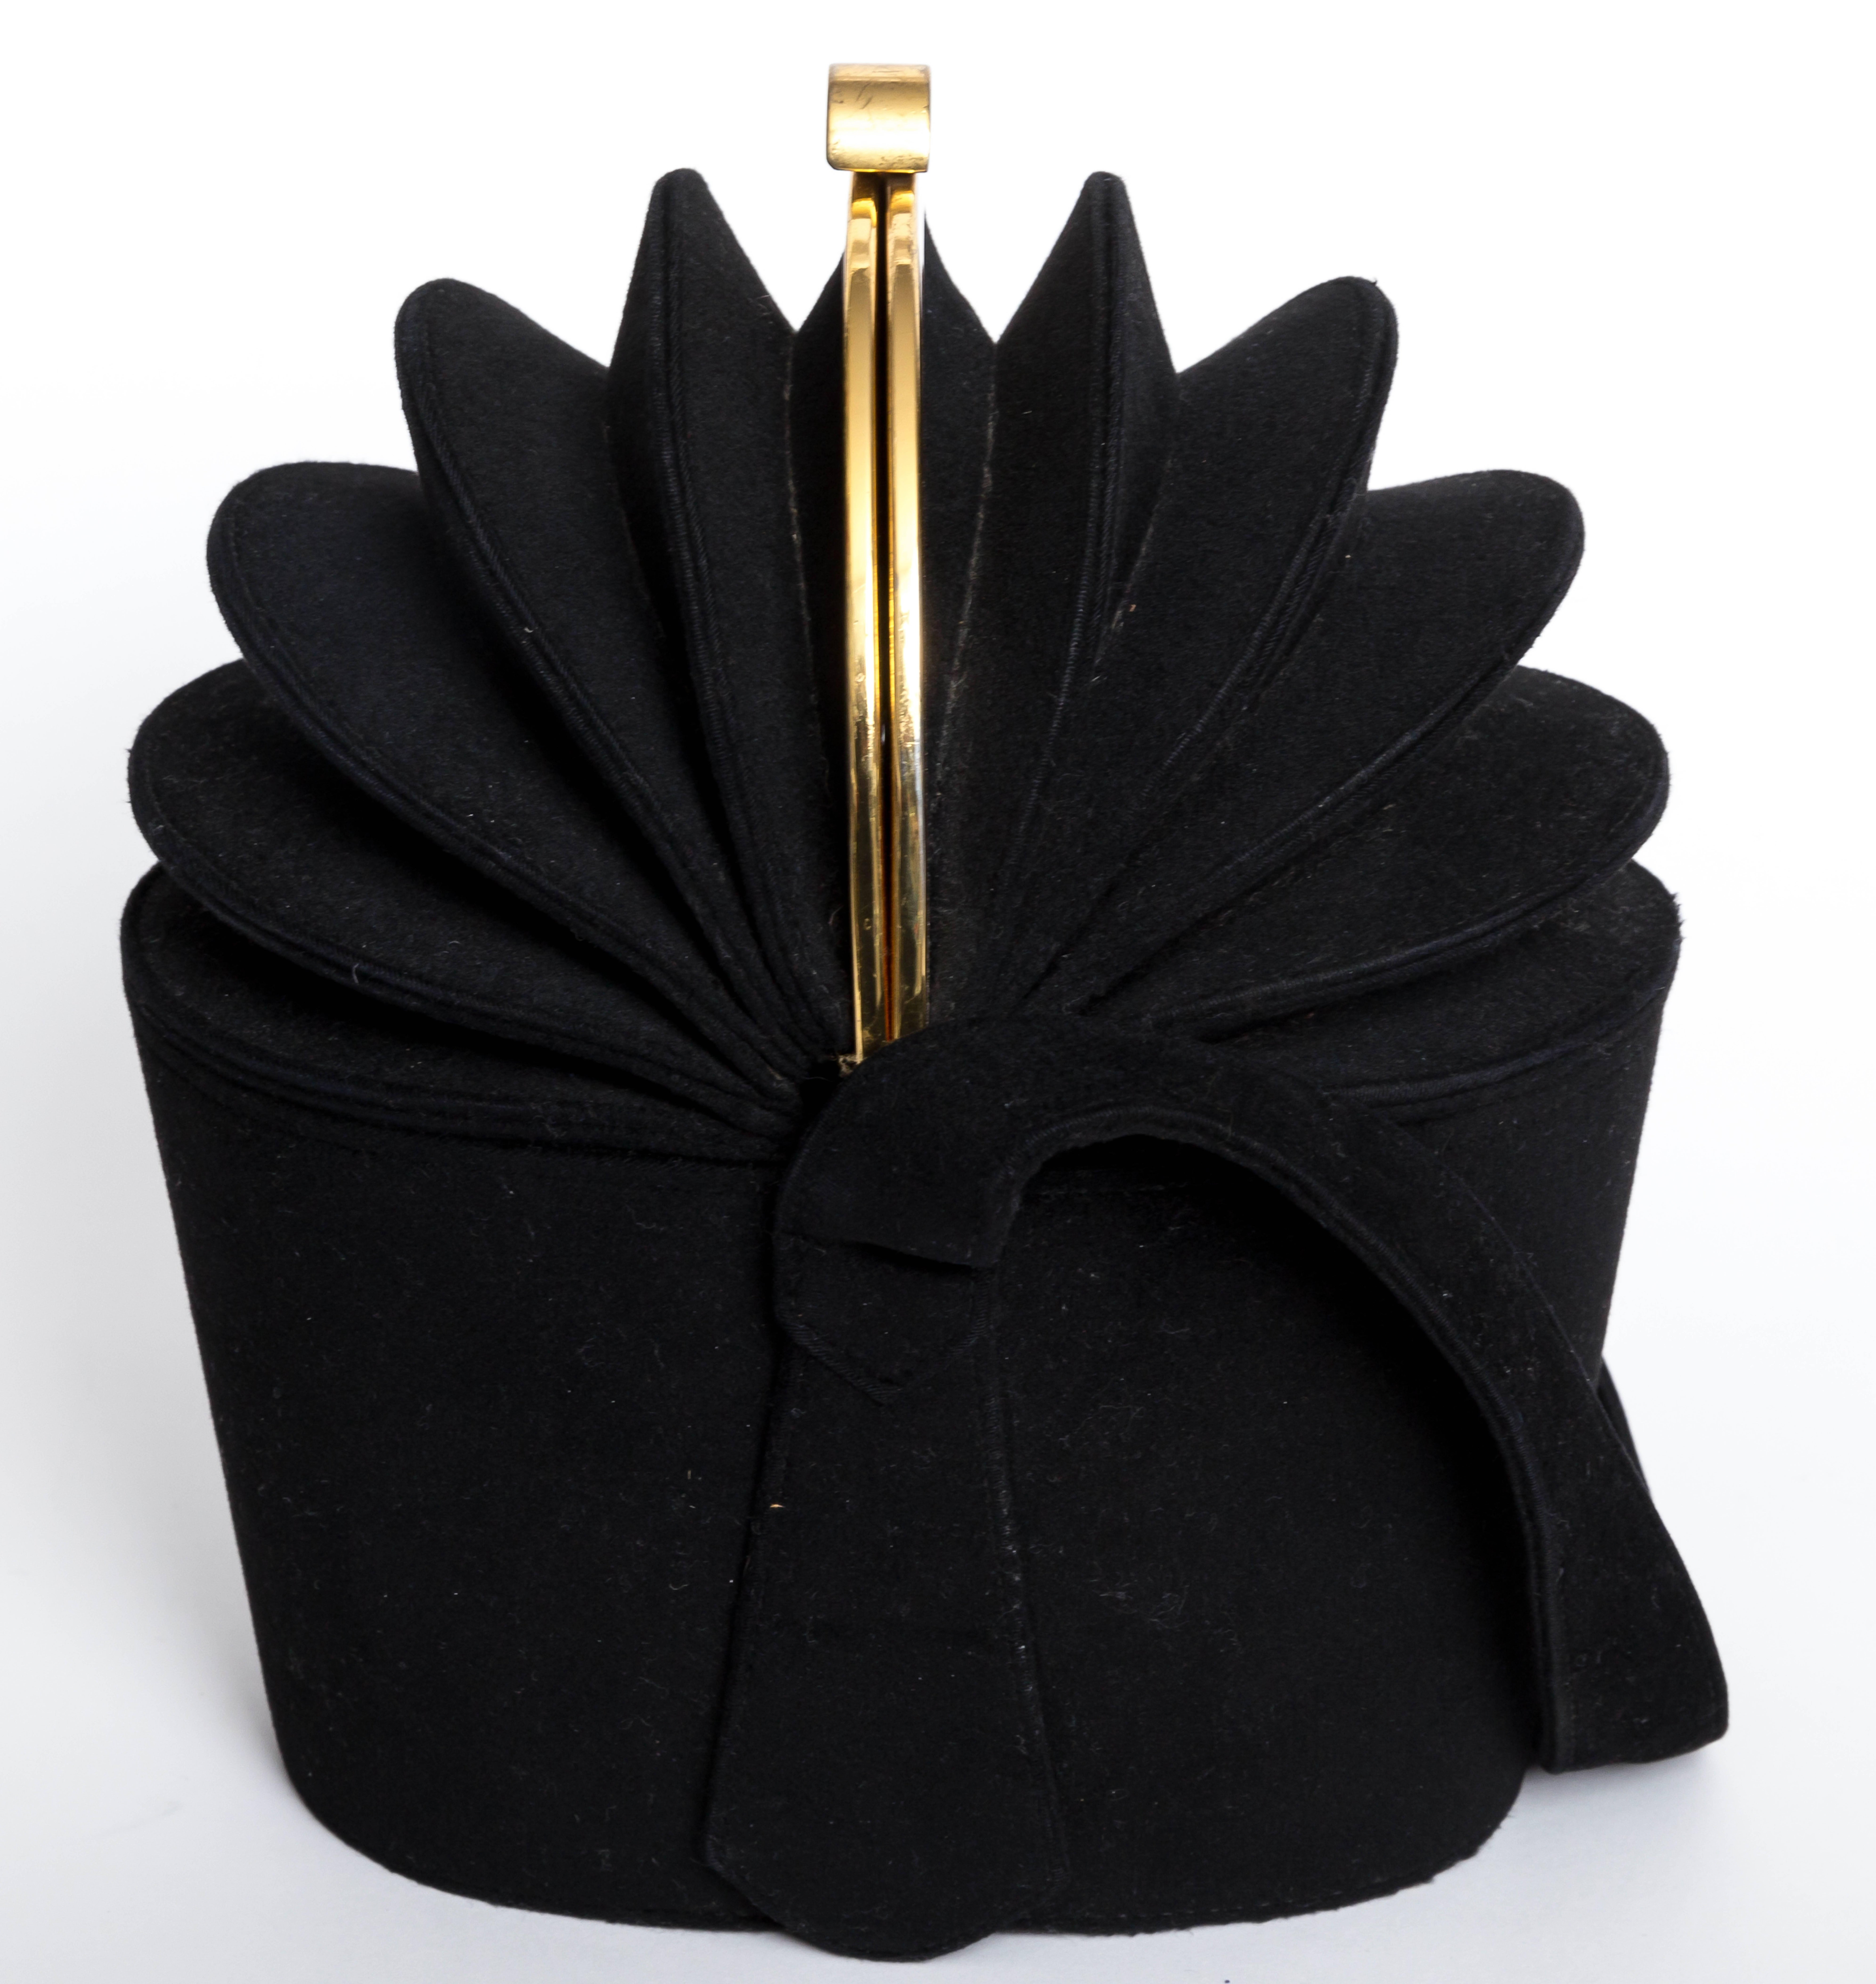 Wonderfully Engineered Box Bag With An Accordion Shaped Top By Eli Bogan. This Cleverly Designed Handbag Is Very Modern Despite the Fact That It Was Patented In 1949. The Bag Is Made Of Black Wool With Brass Hinges and Clasp. The Folded Top Opens To